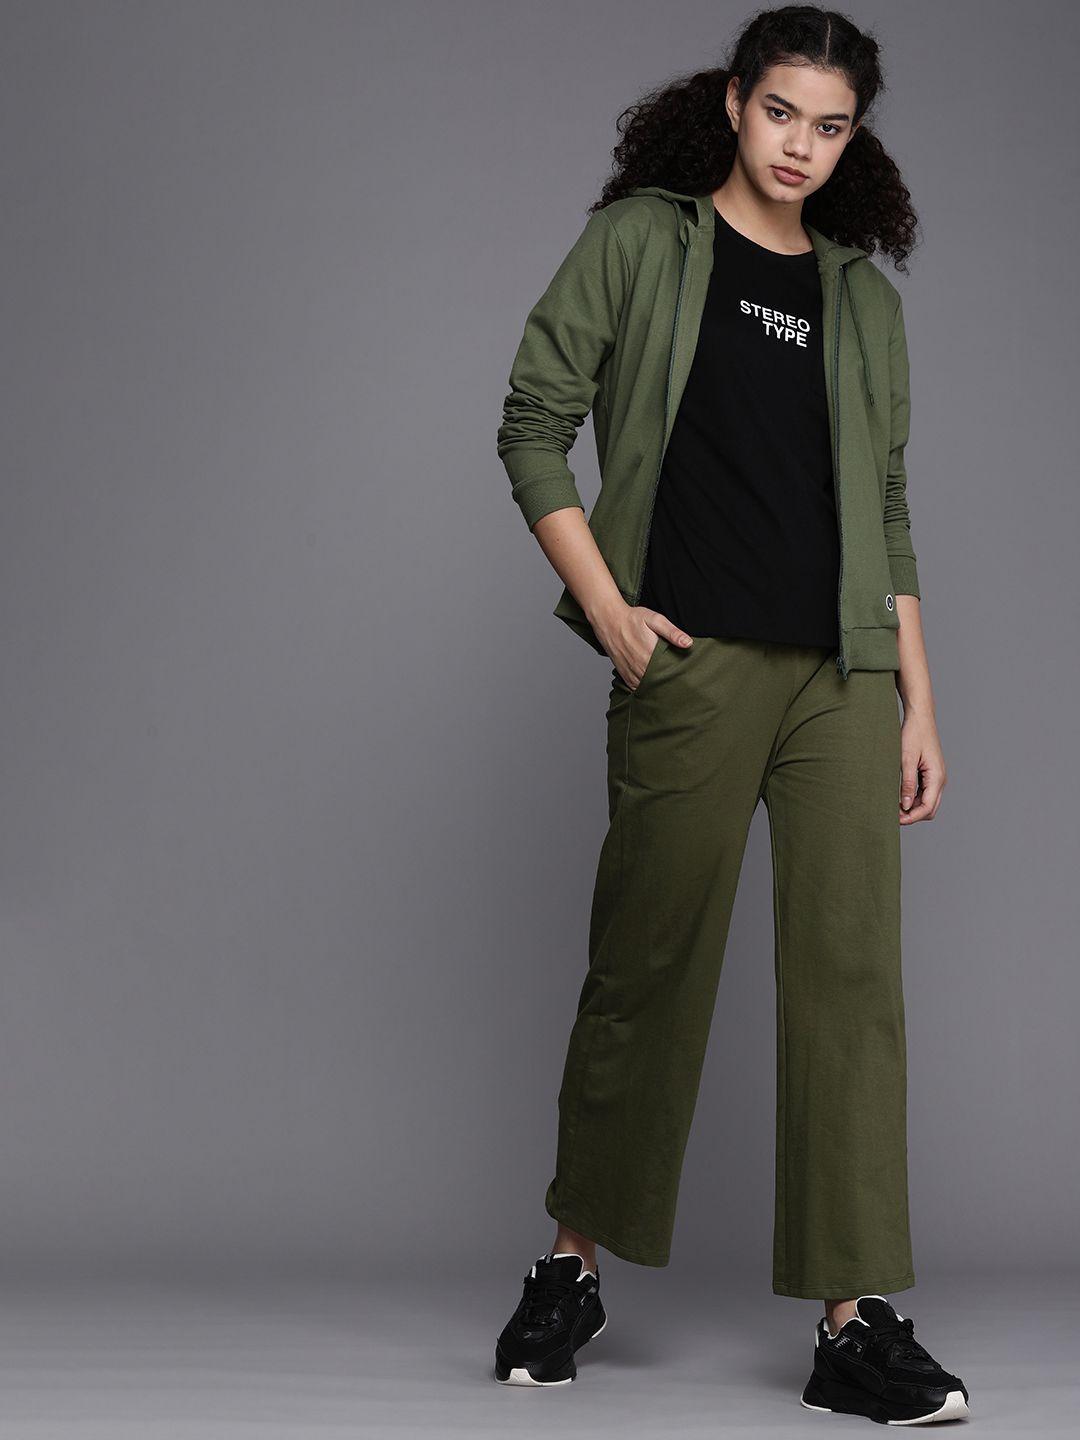 allen-solly-woman-women-olive-green-flared-high-rise-culottes-trousers